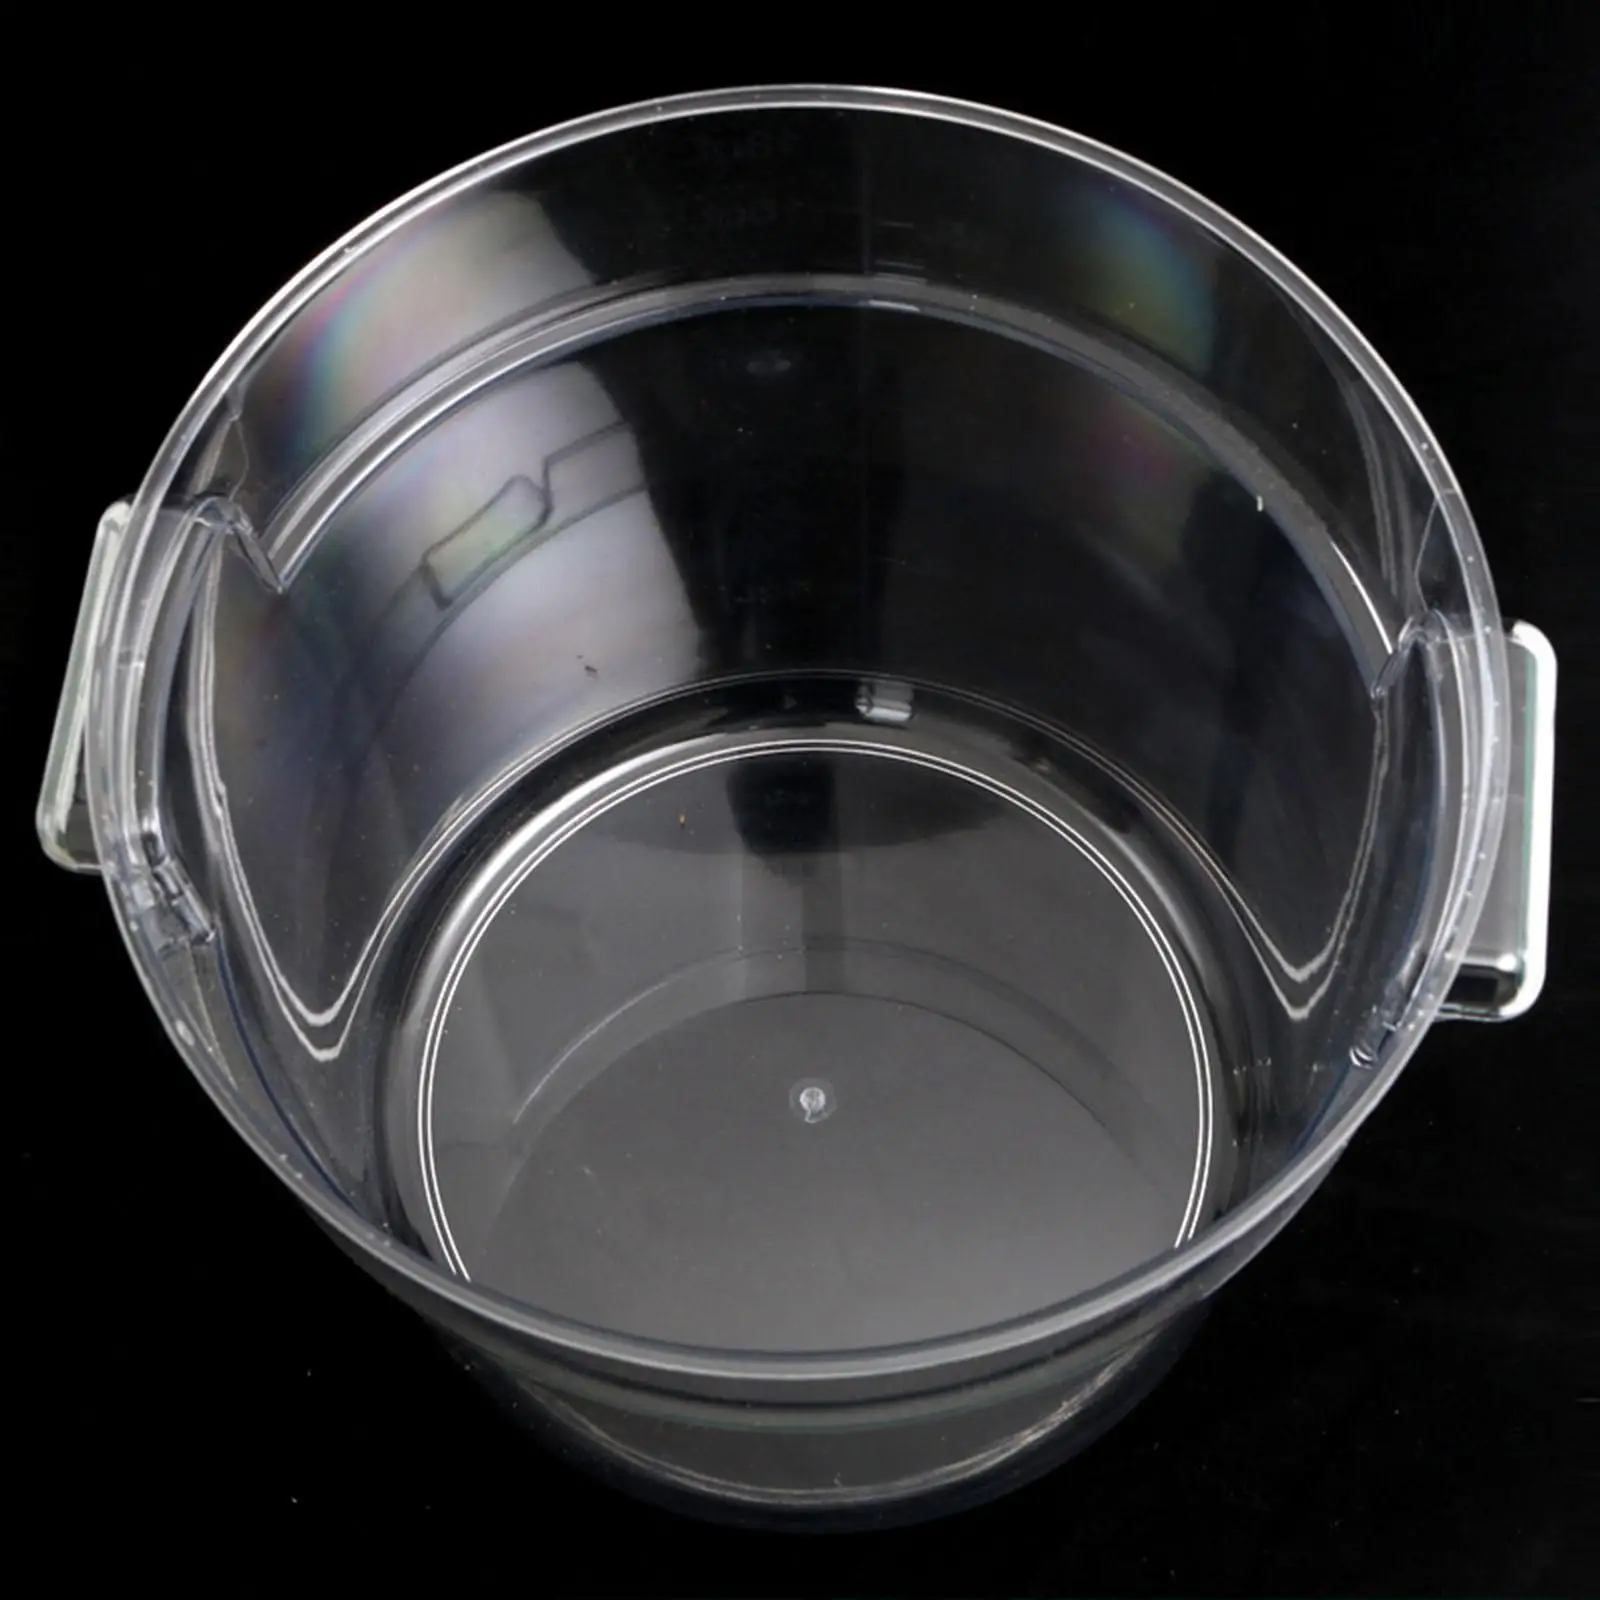 Transparent Car Wash Bucket Water Storage Bucket Household High Impact Resistance Multipurpose Sturdy for Camping Hiking